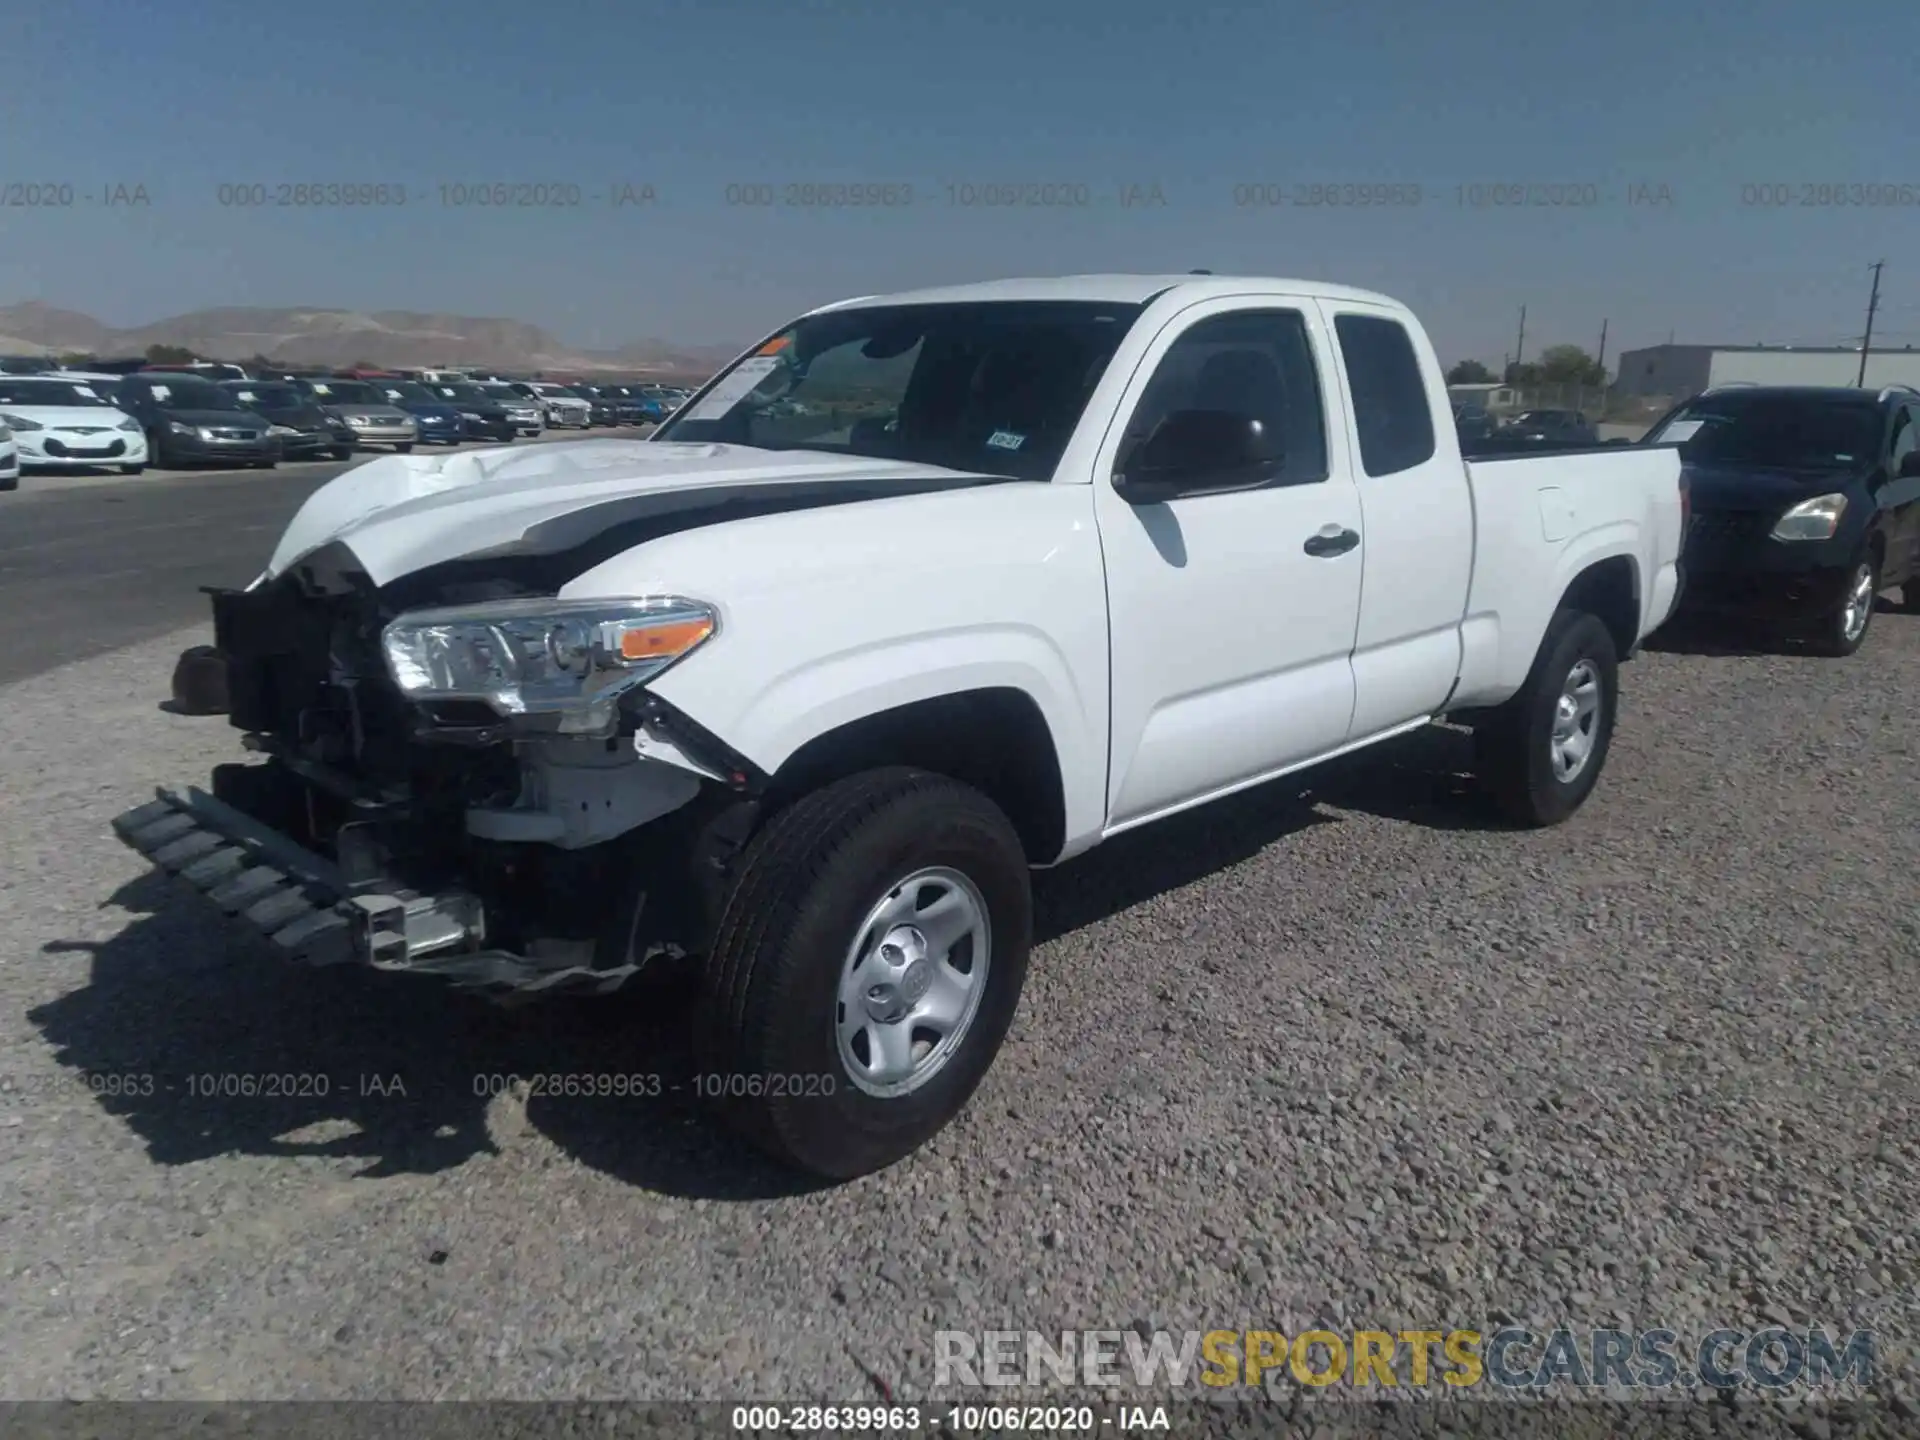 2 Photograph of a damaged car 5TFRX5GN2LX167859 TOYOTA TACOMA 2WD 2020